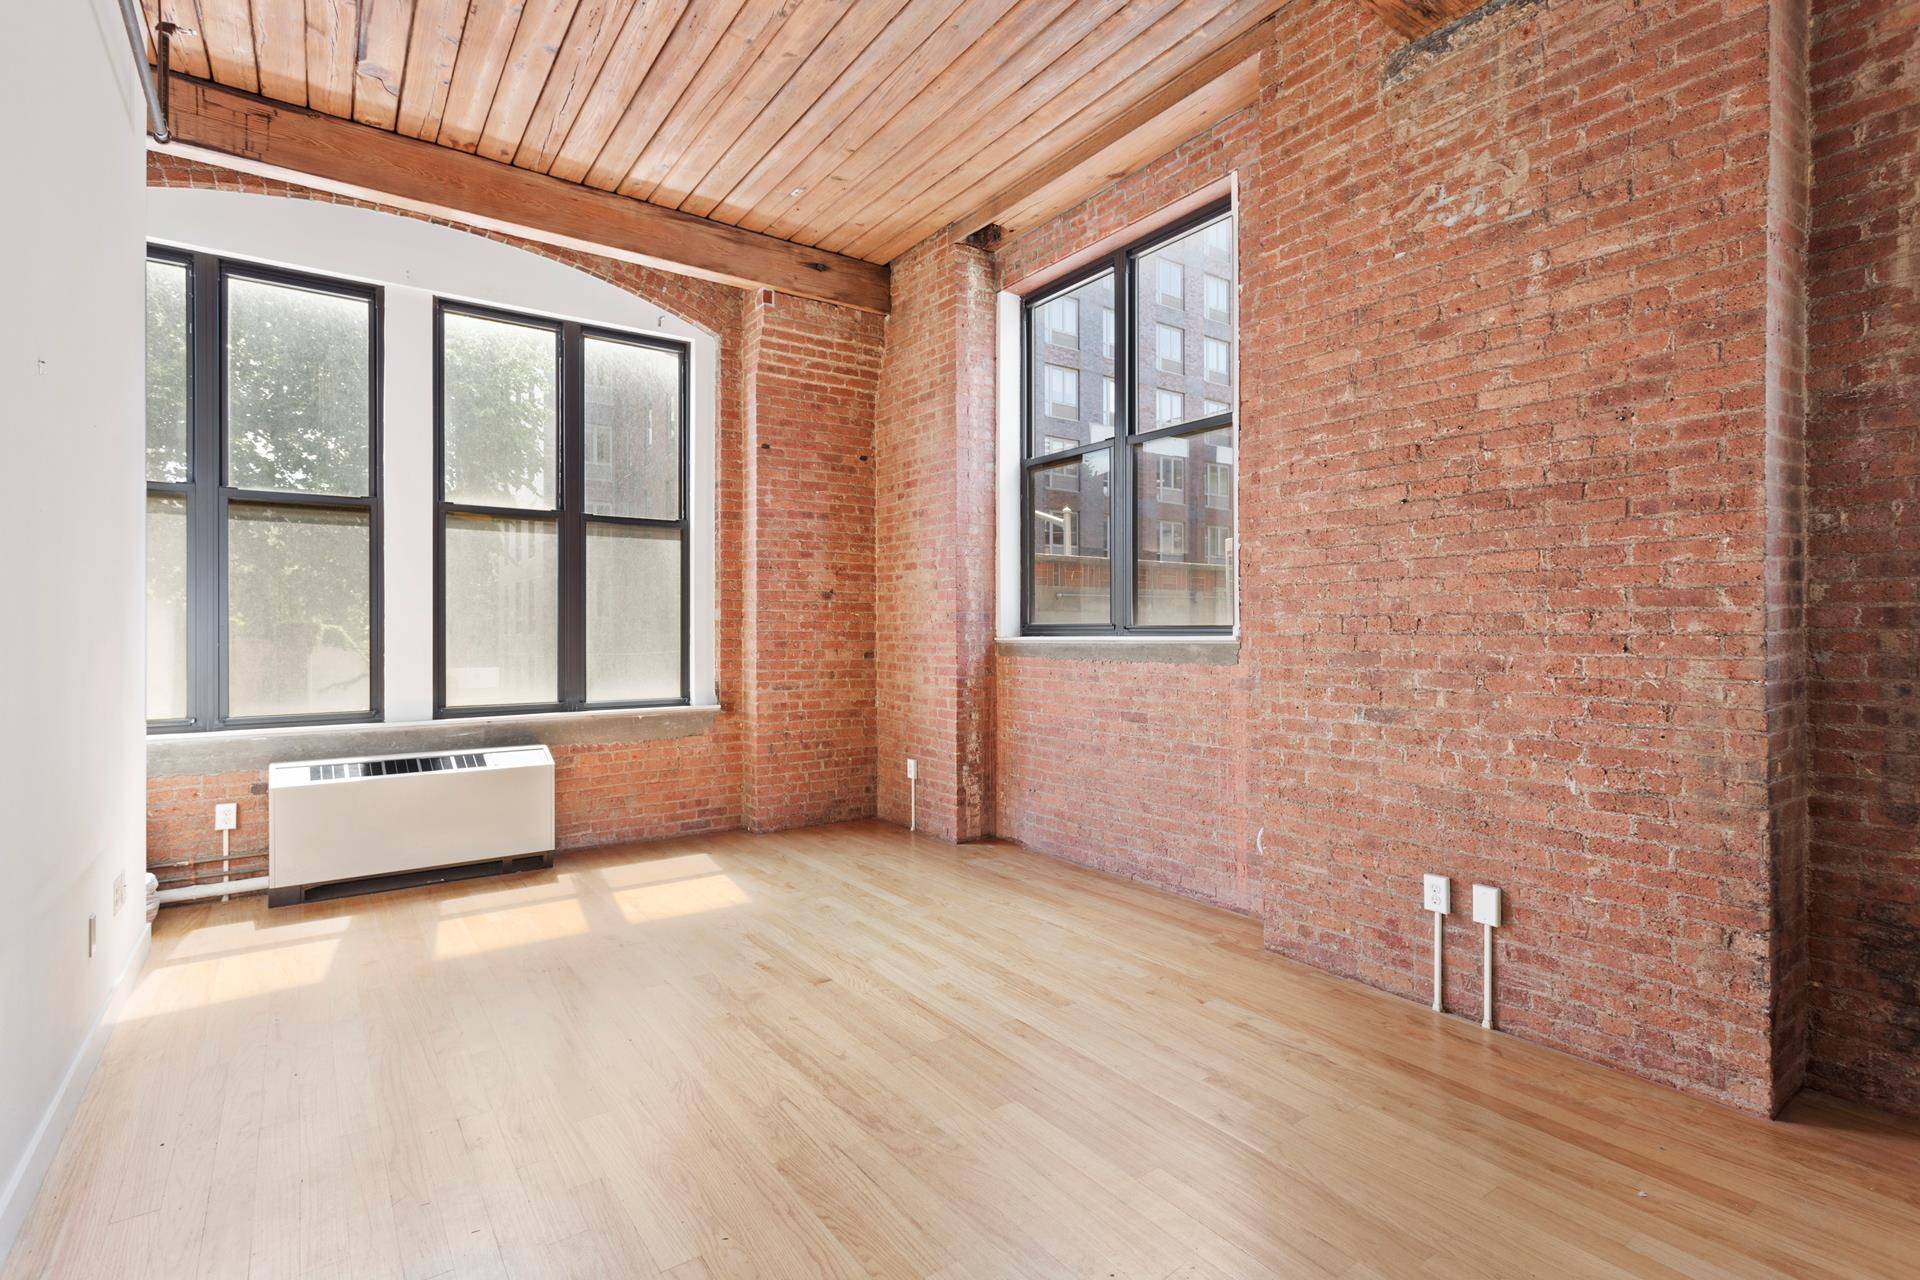 RENT STABILIZED ! ! ! Upon entering this spacious corner, one bedroom one bathroom at the Wythe Confectionary, you are immediately captivated by the original exposed brick, wooden beams and ...